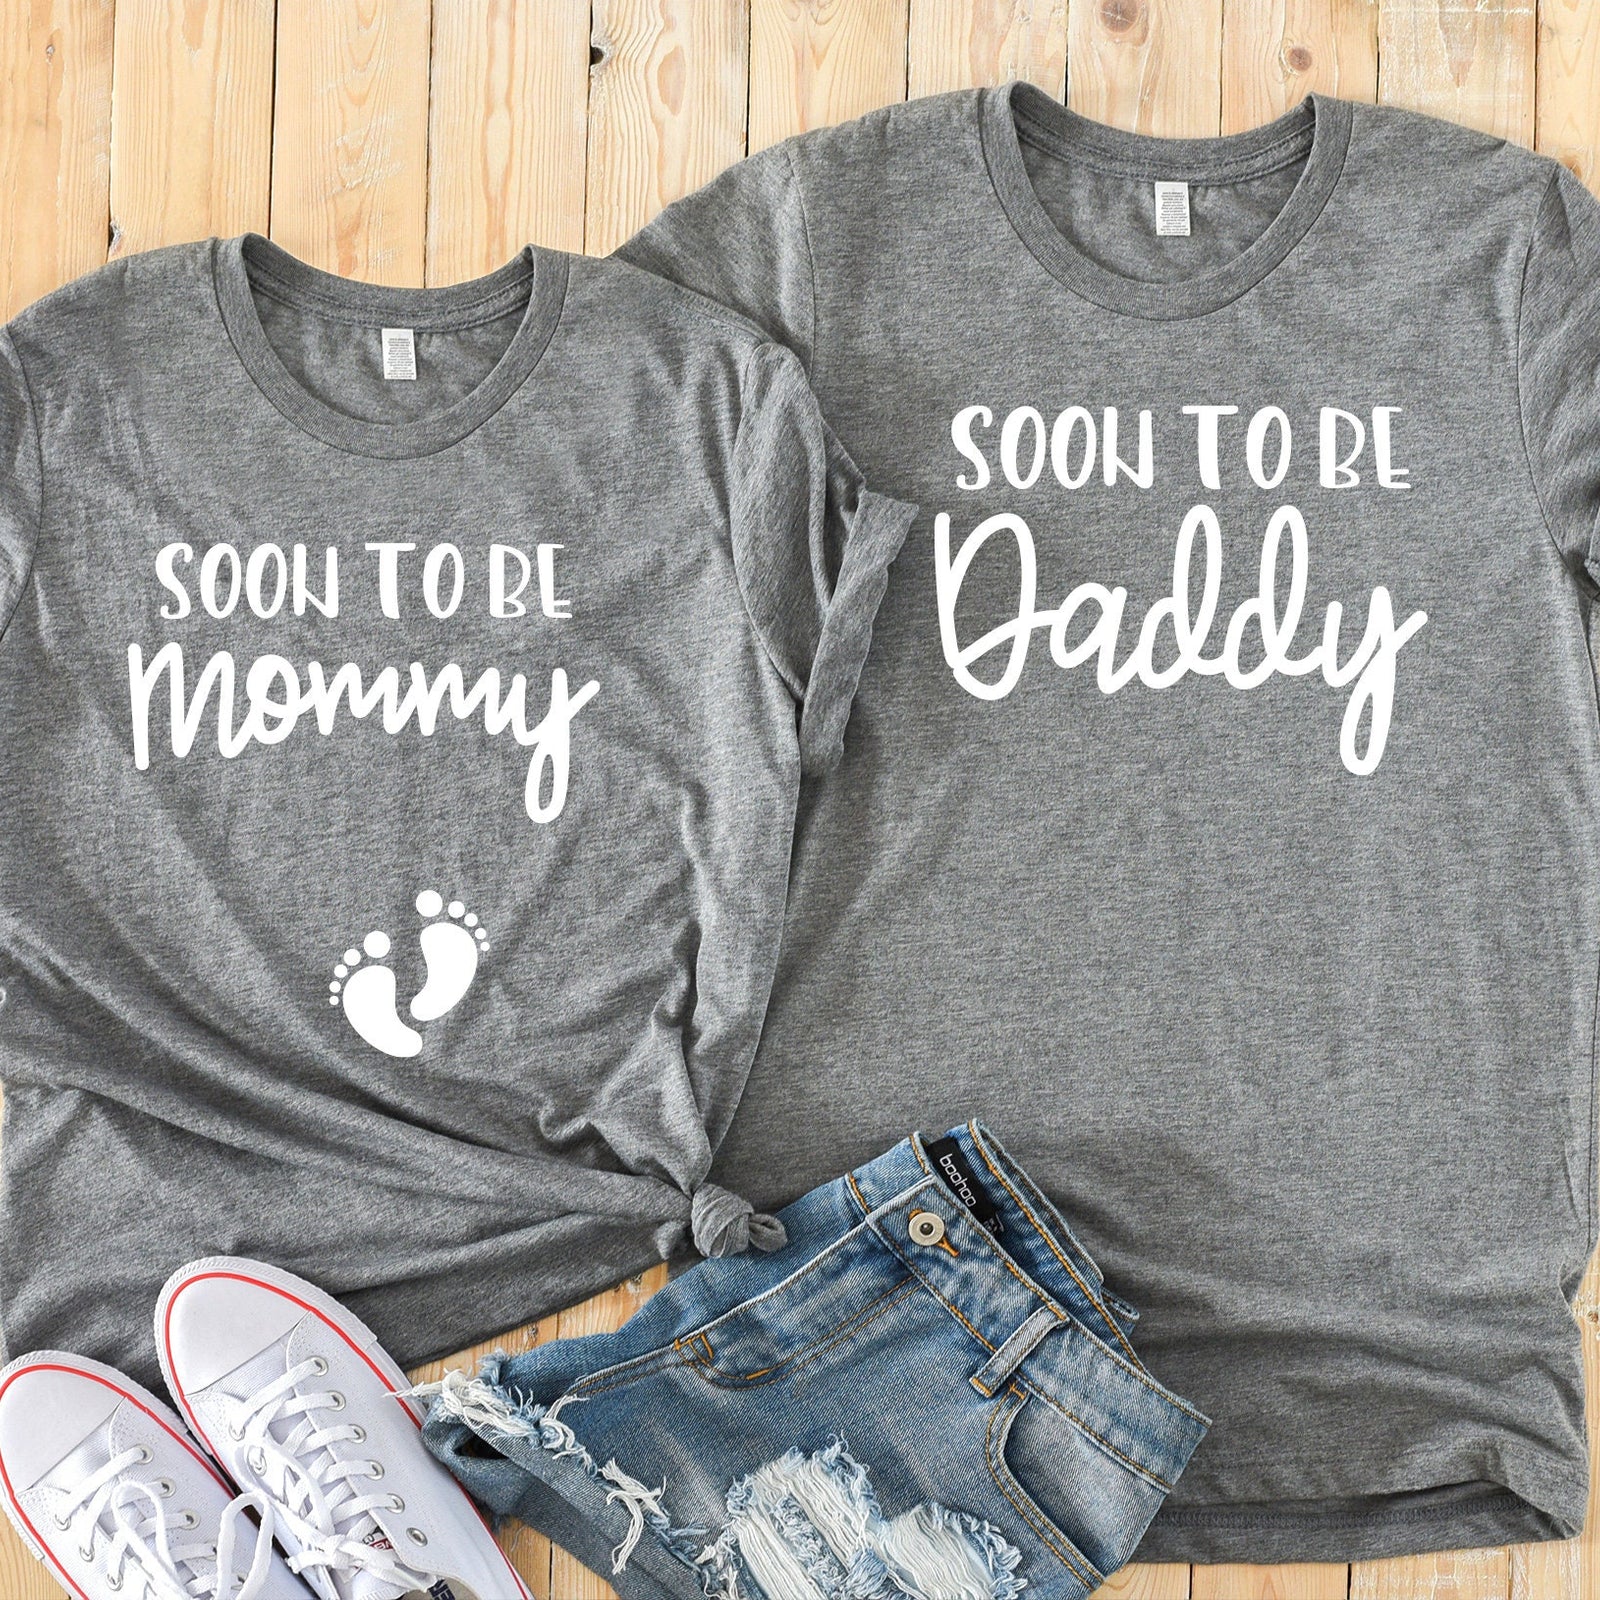 Soon to be Mommy - Soon to be Daddy -Matching Shirts - Cute Pregnancy Announcement - Baby Reveal